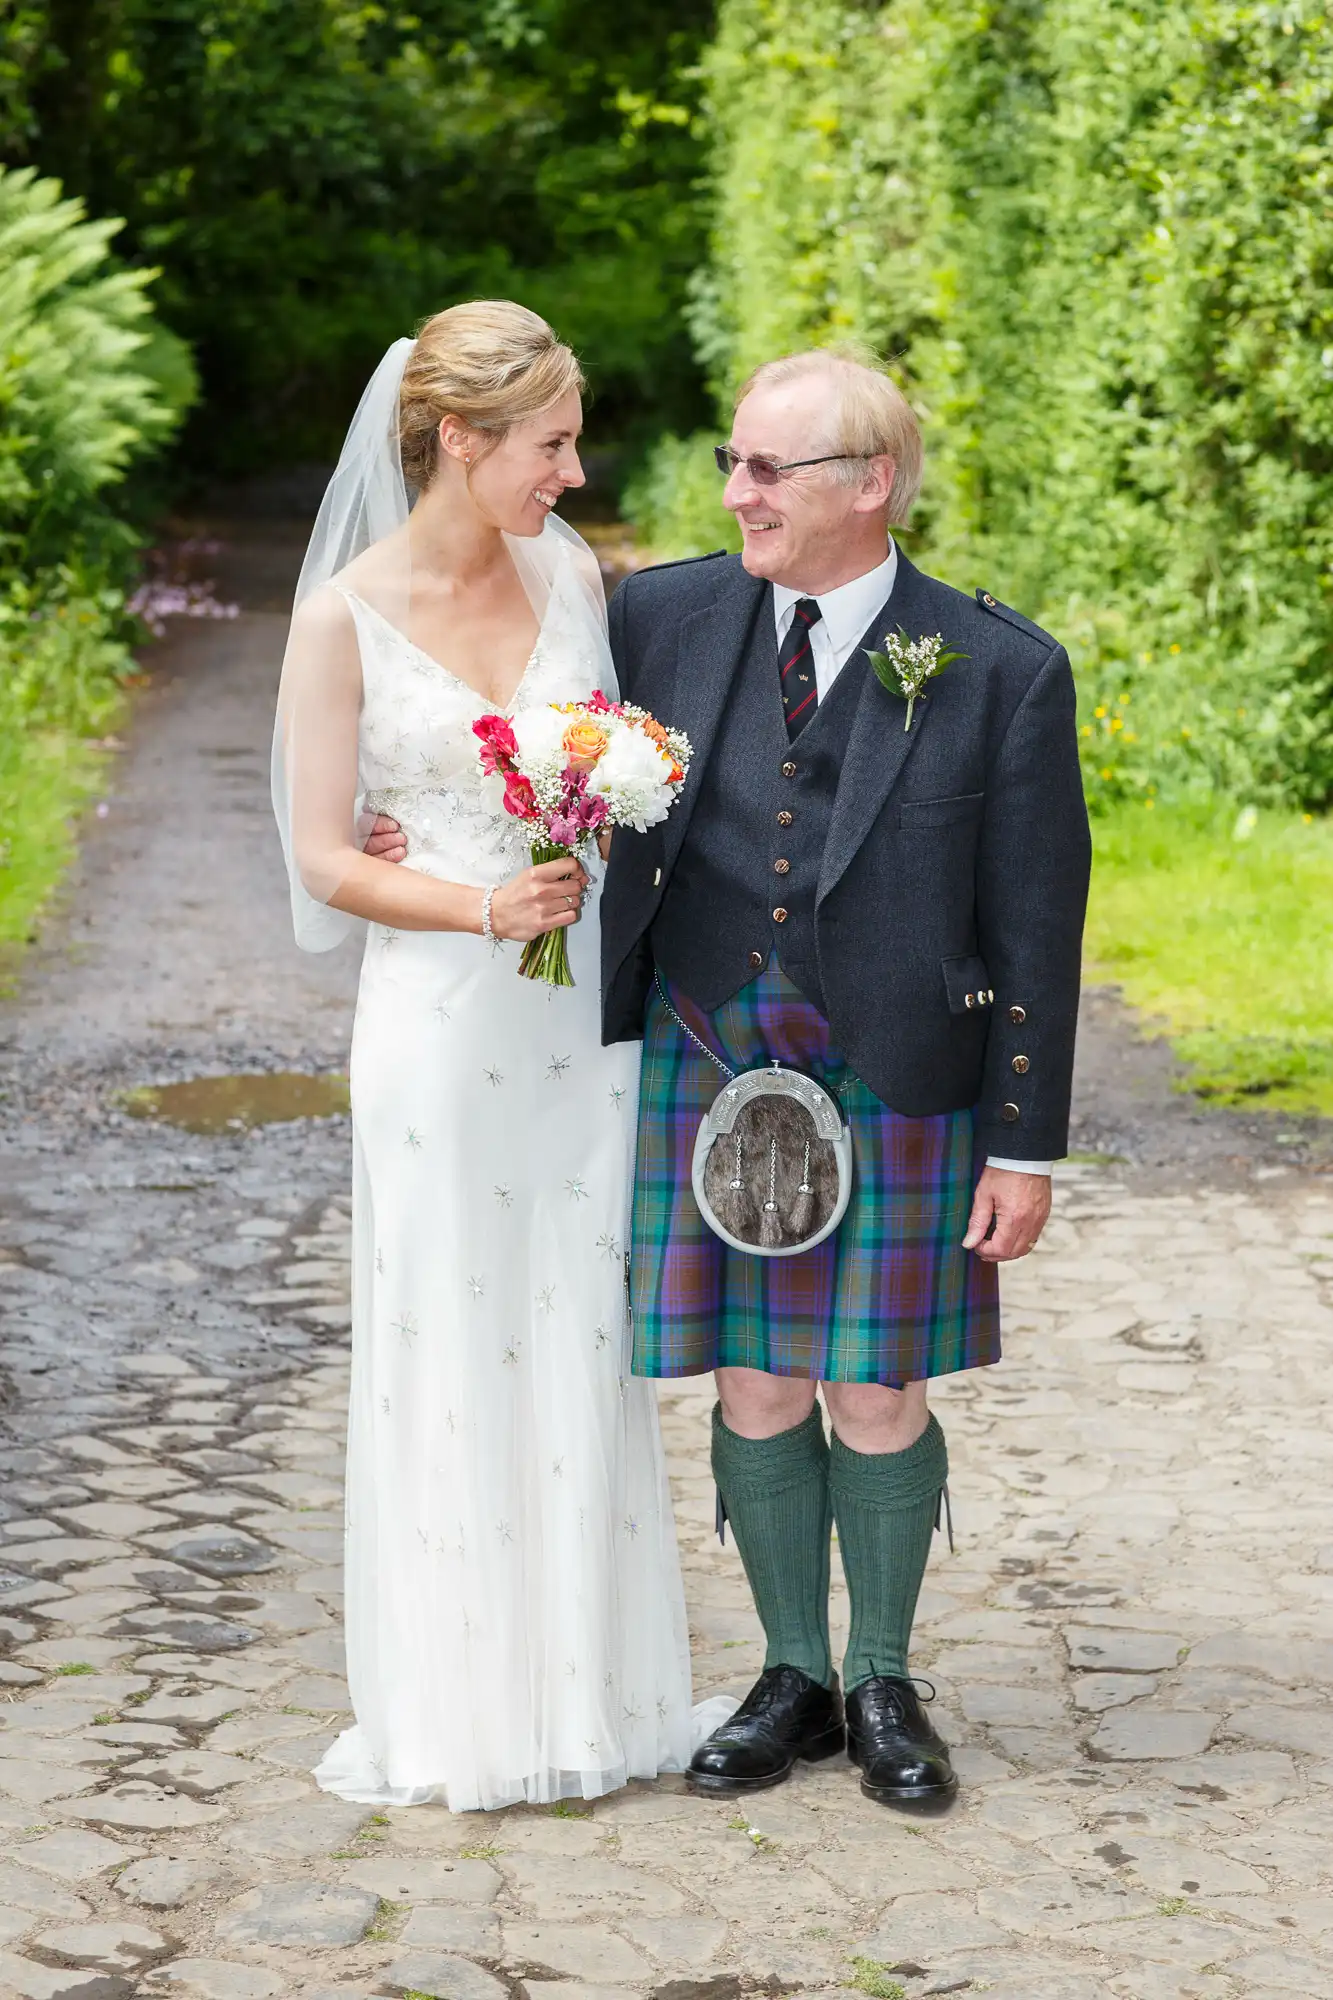 A bride in a white dress and a groom in a kilt and jacket stand arm in arm on a garden path, smiling at each other.